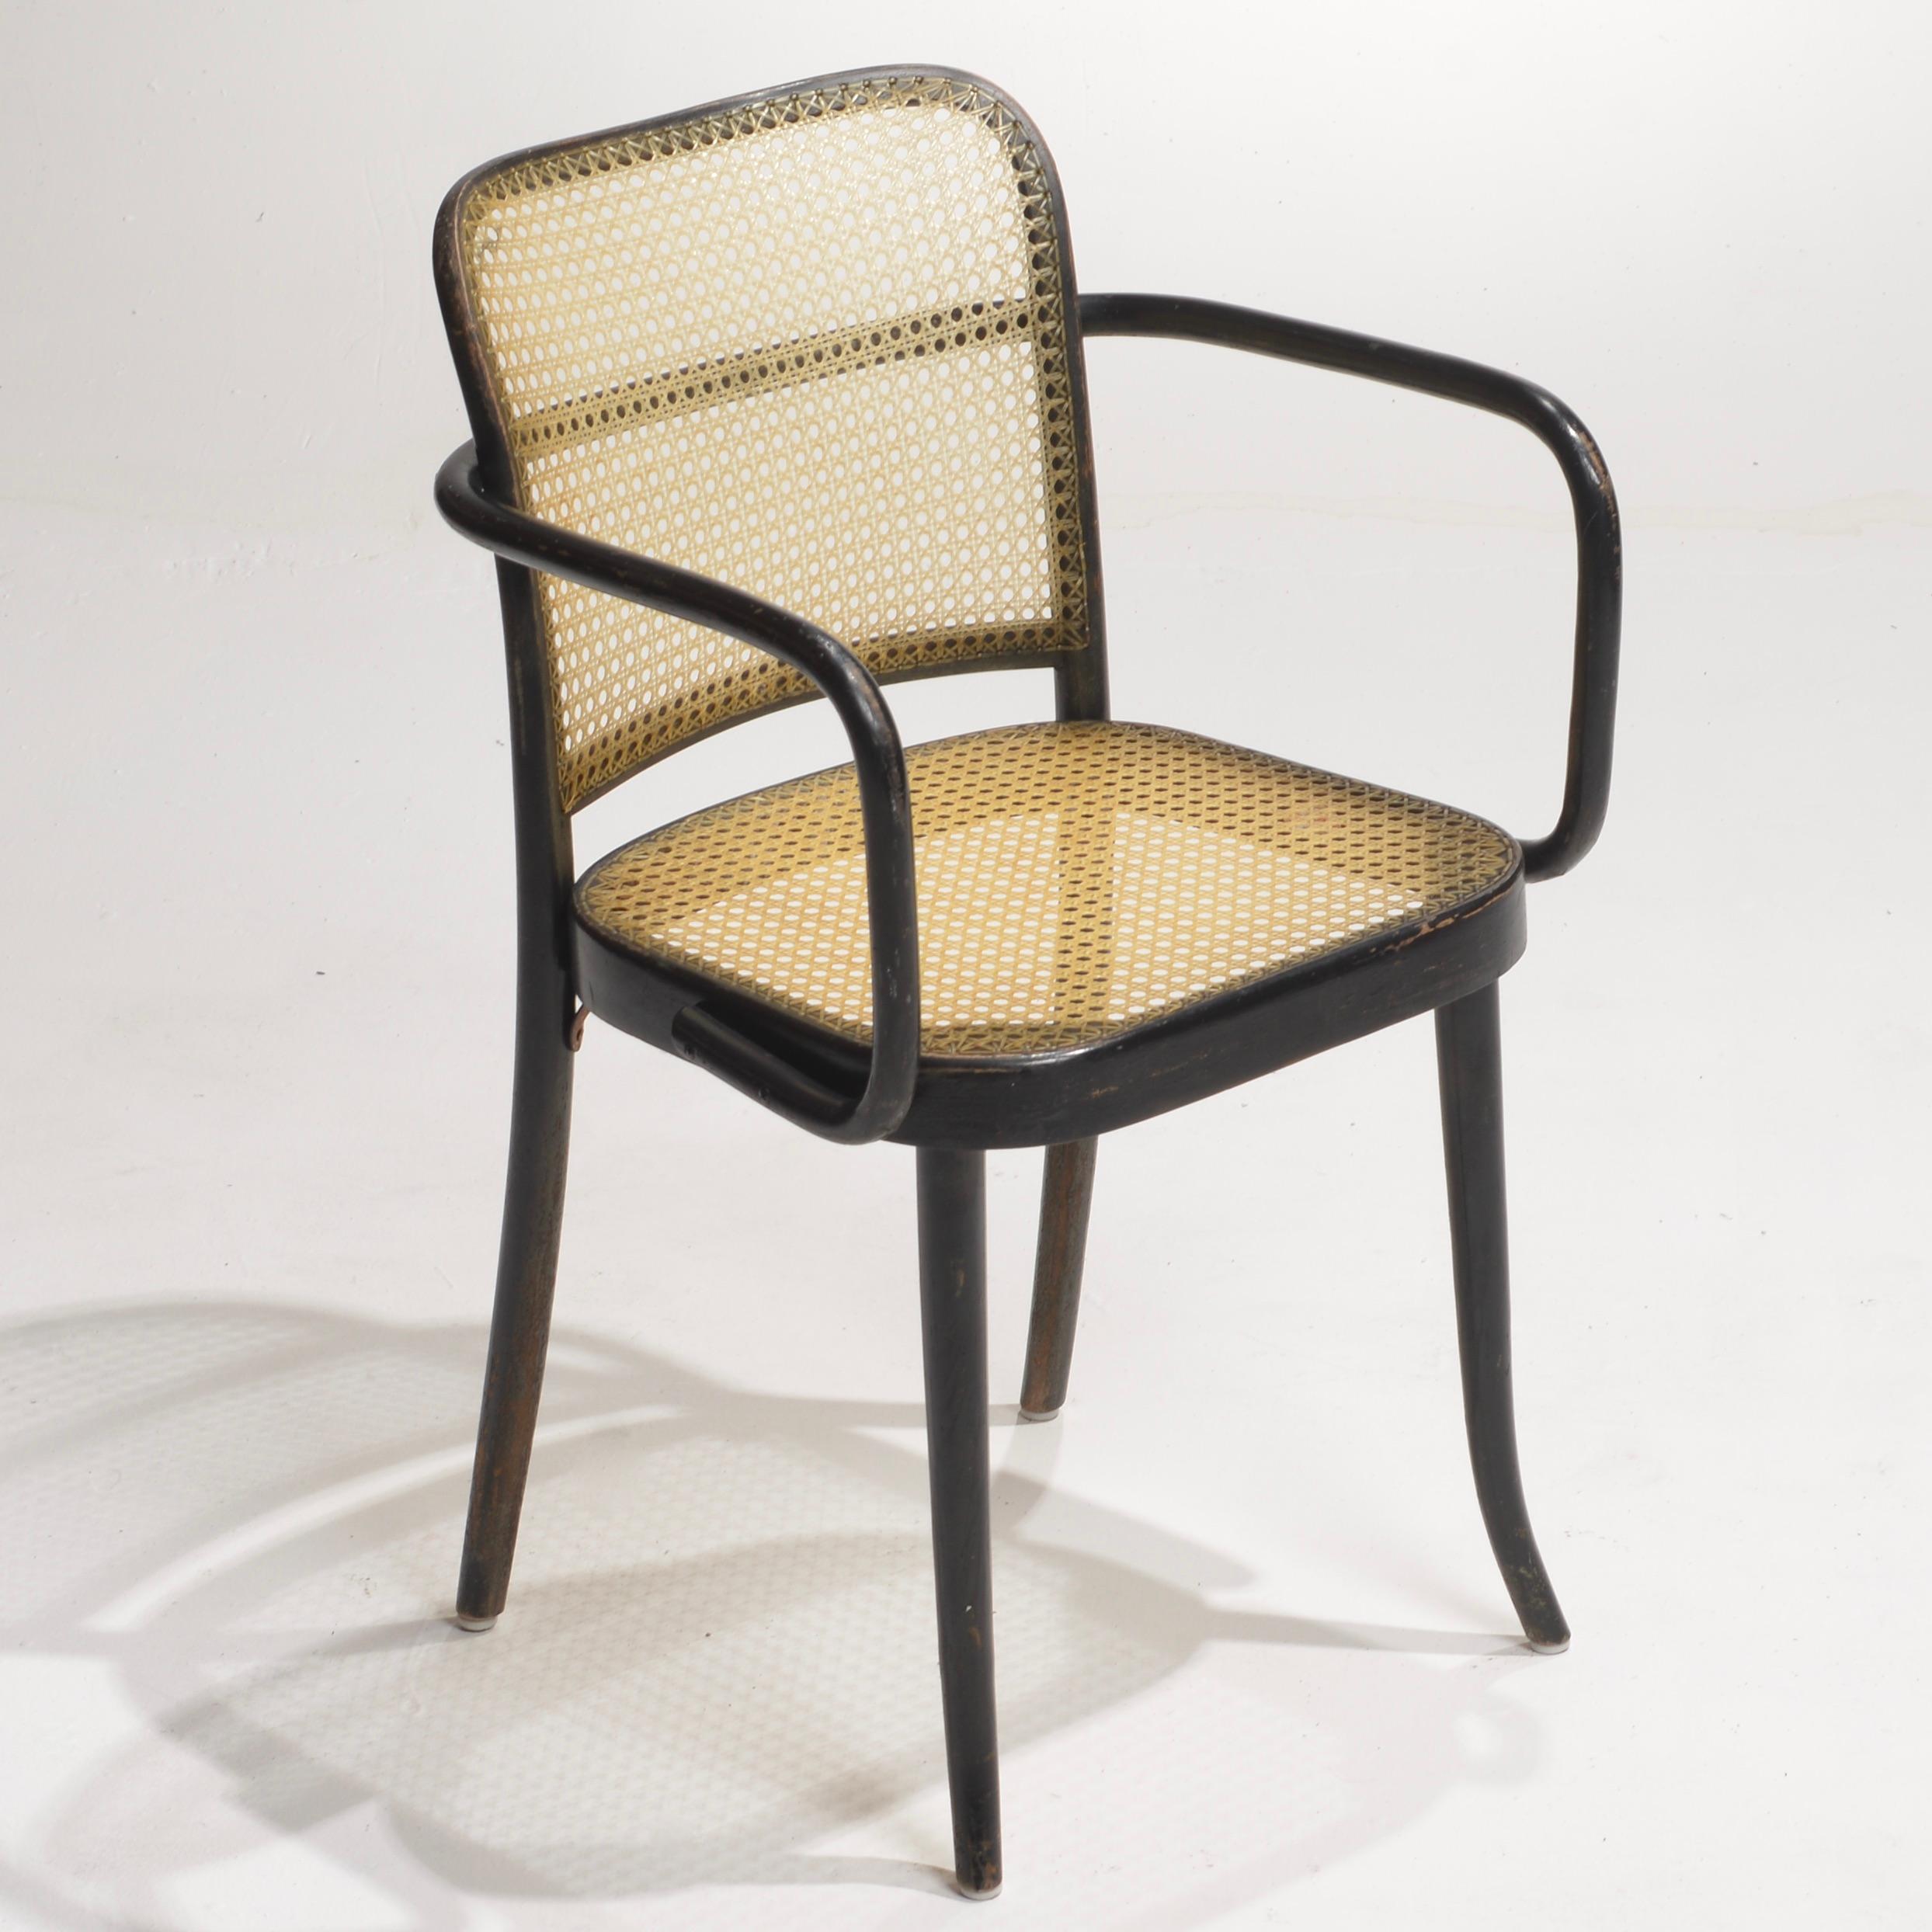 European Josef Hoffmann Bentwood Beech Prague Model 811 Chairs in Black and Leather Weave For Sale